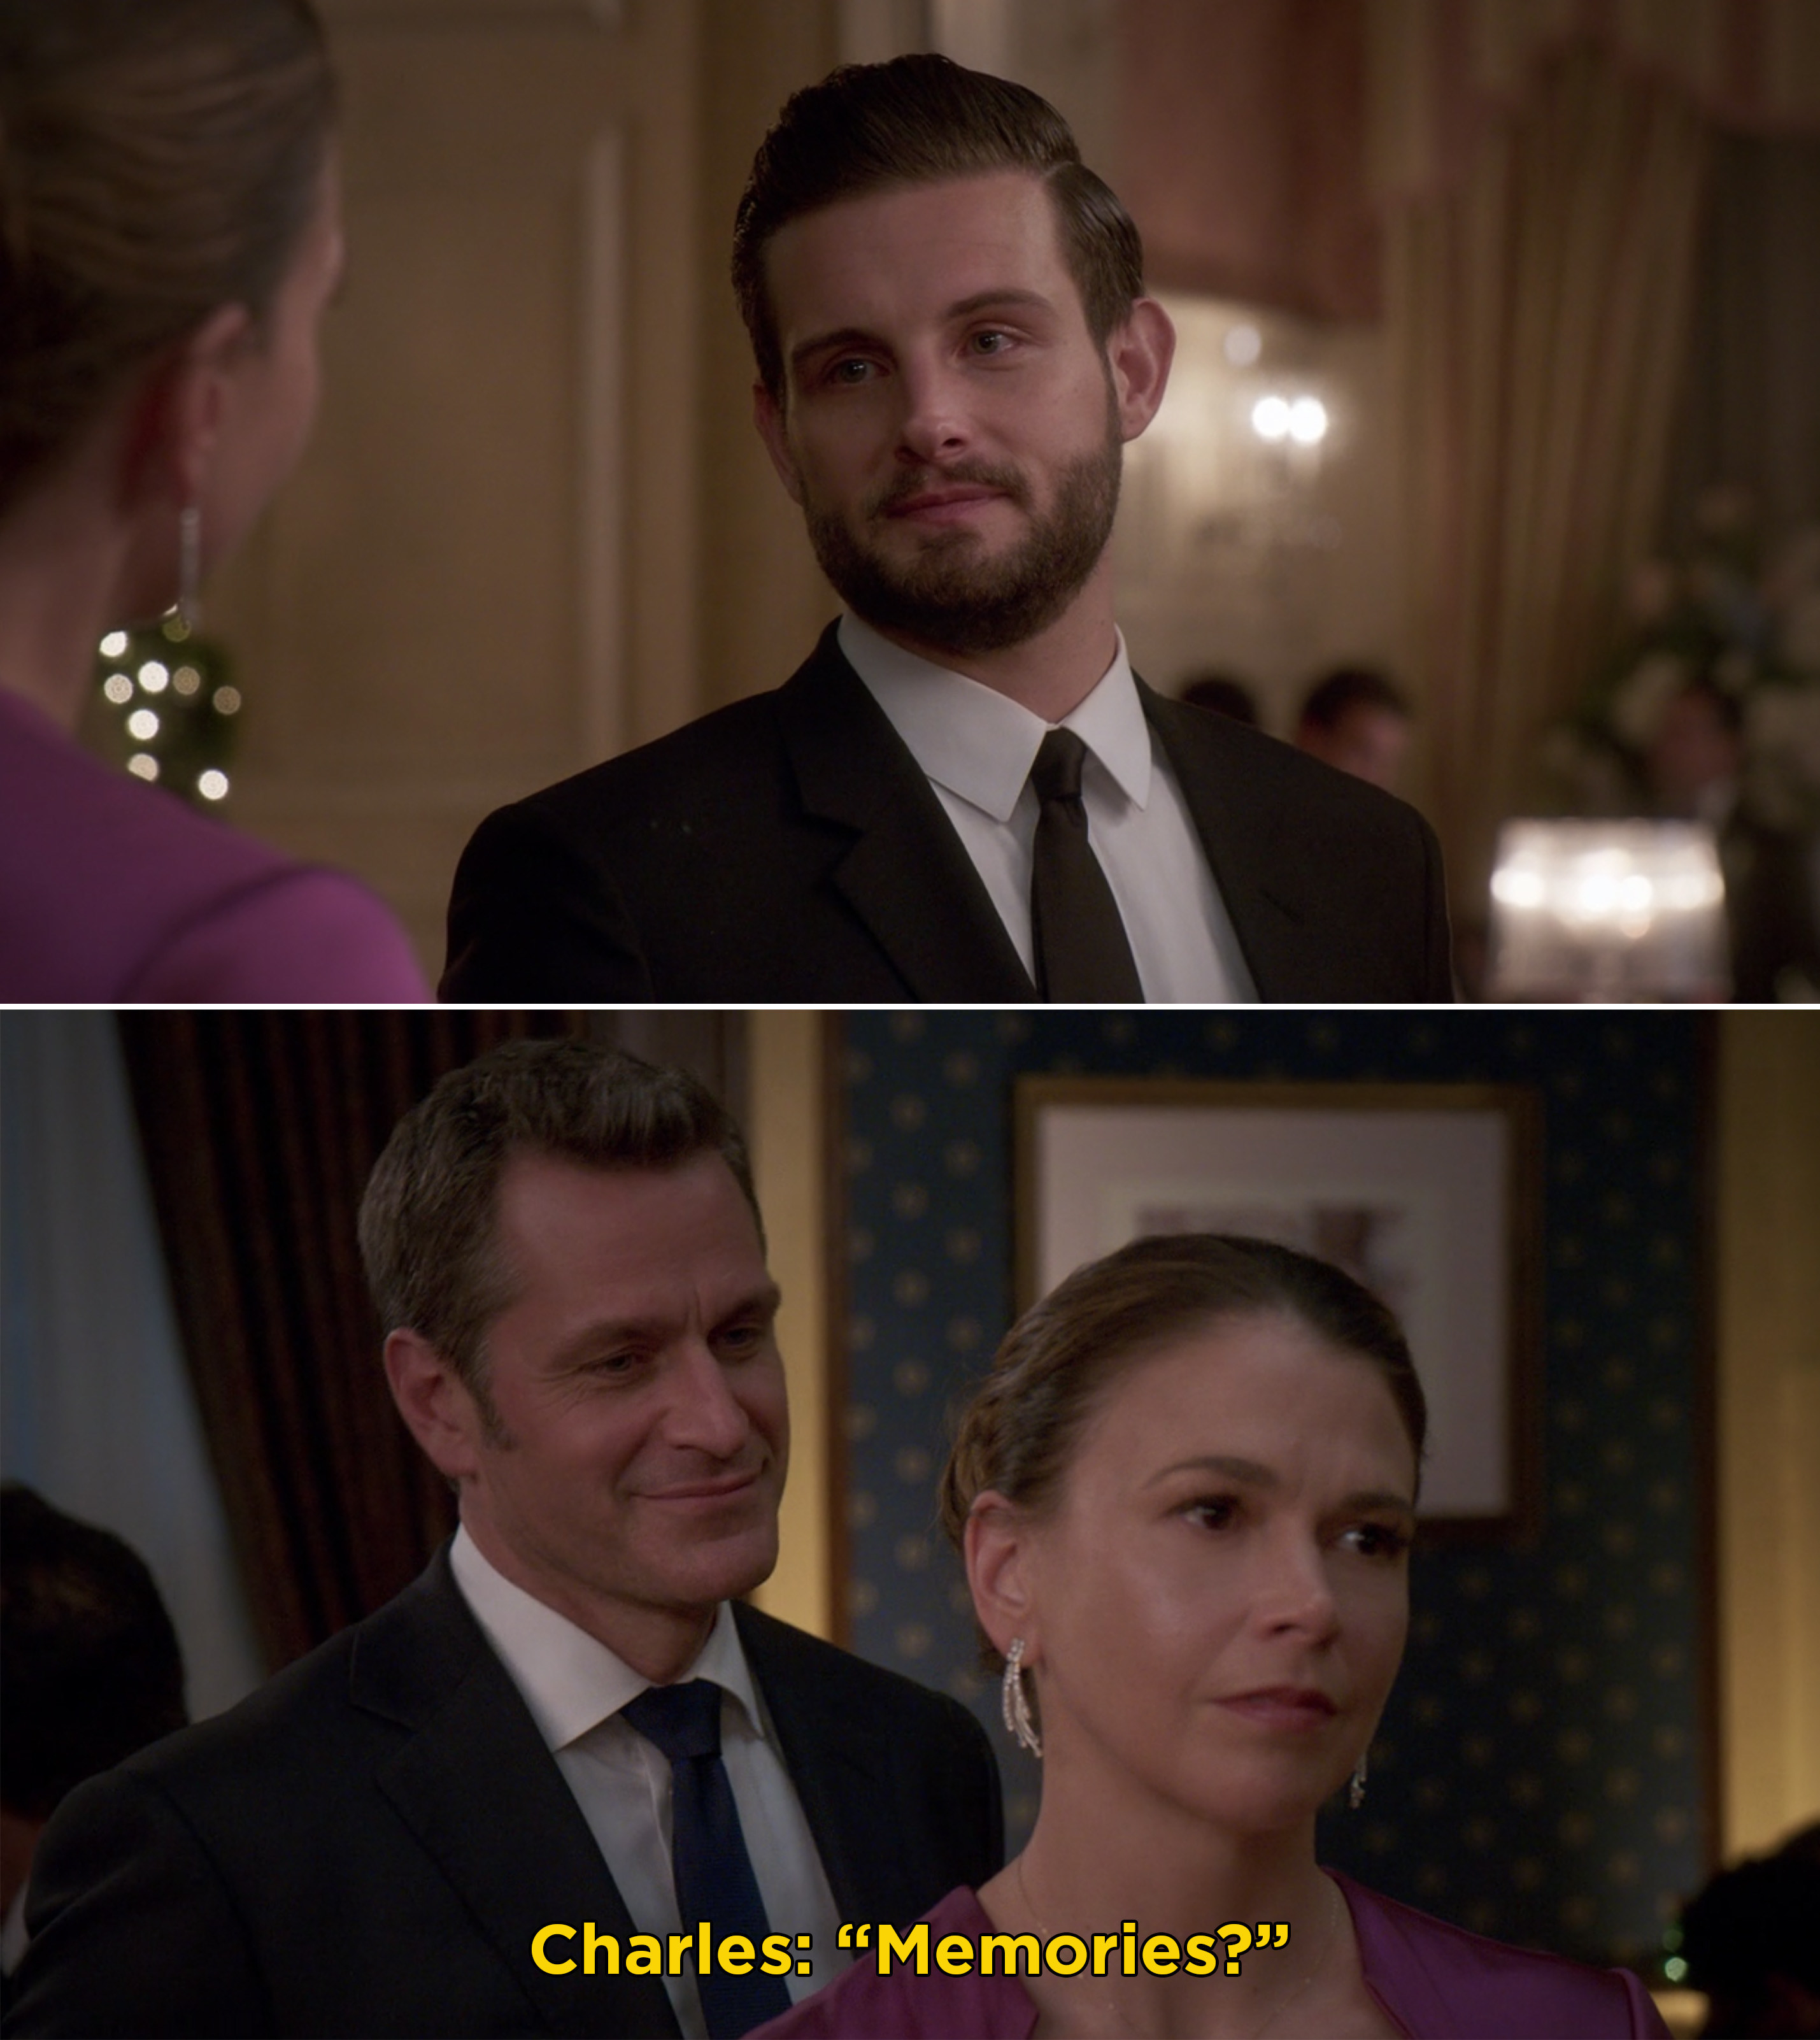 Liza looking longingly after Josh and Charles coming up behind her and saying, "Memories?"